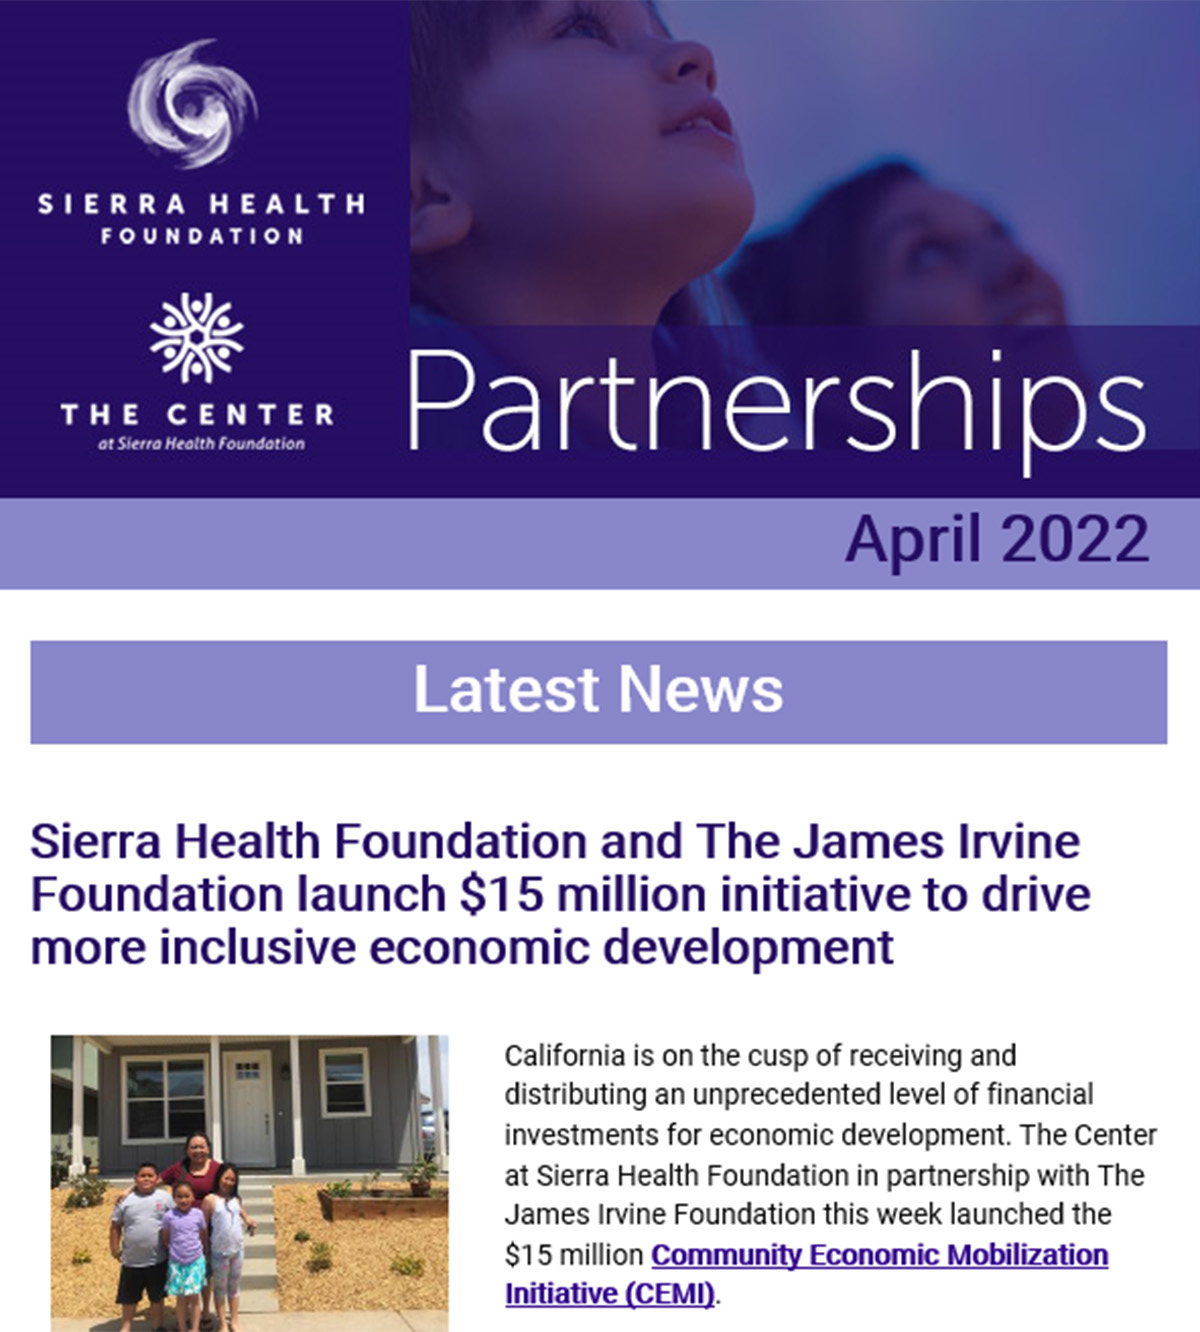 Read the June 2021 Issue of Partnerships